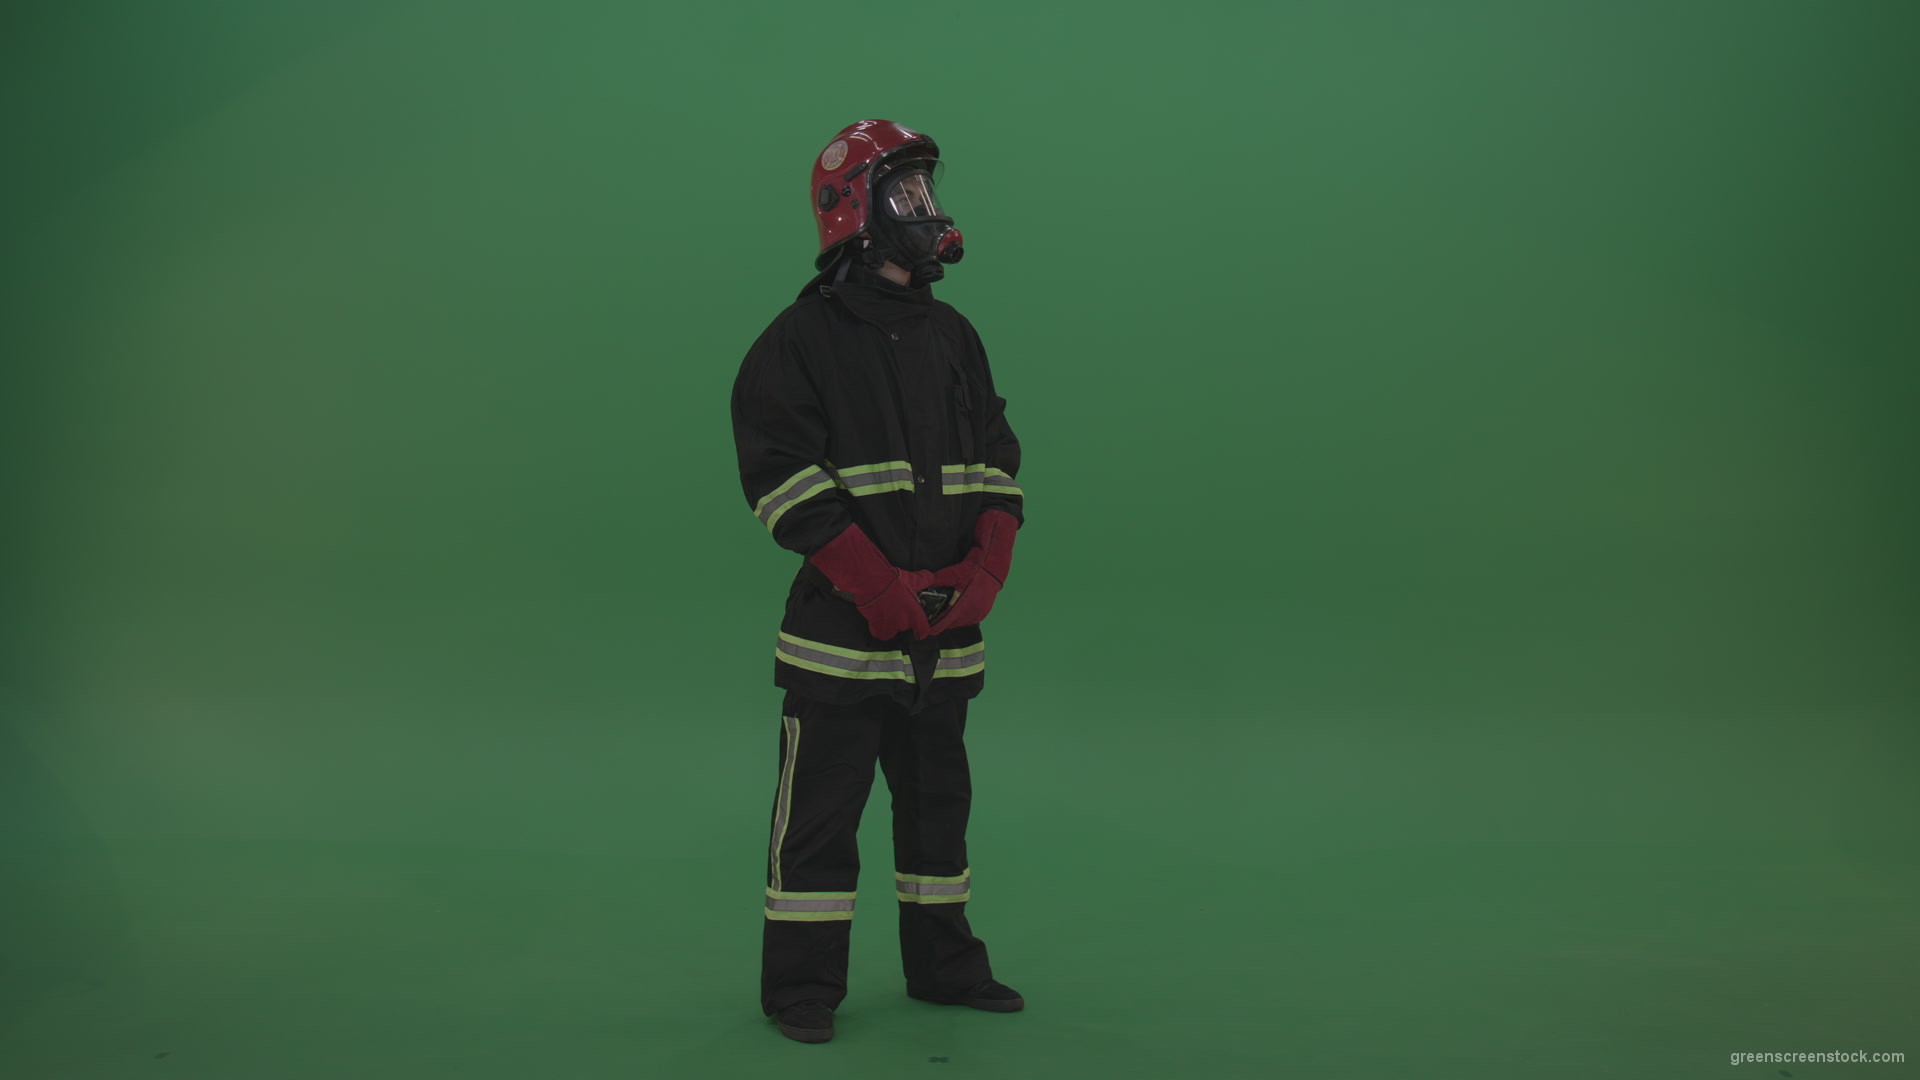 Young_Firefighter_Wearing_Full_FIreman_Working_Kit_Looking_Around_To_Fing_Some_Fire_Arson_Problems_On_Green_Screen_Wall_Background_002 Green Screen Stock